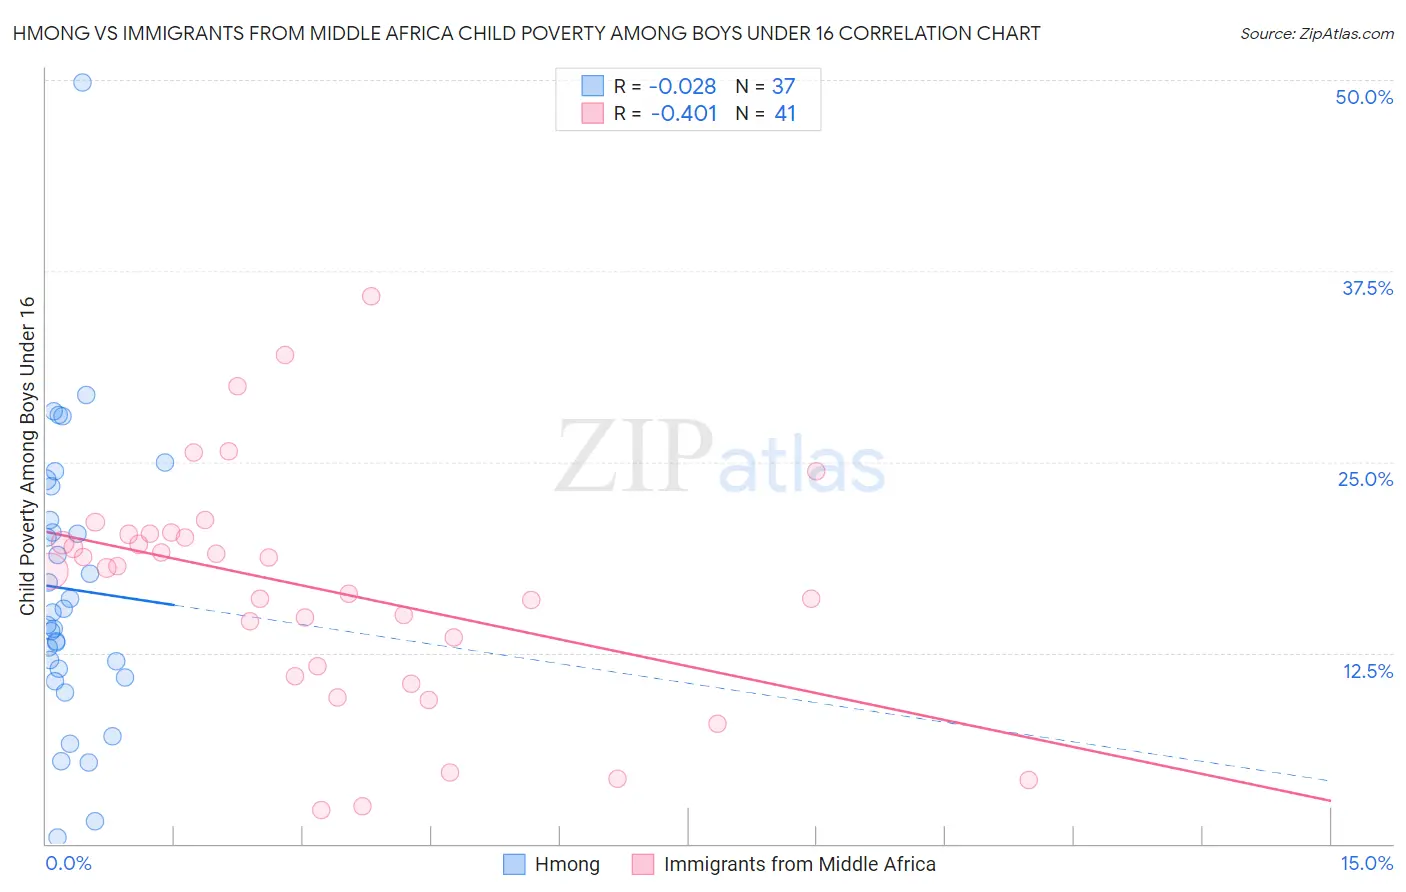 Hmong vs Immigrants from Middle Africa Child Poverty Among Boys Under 16